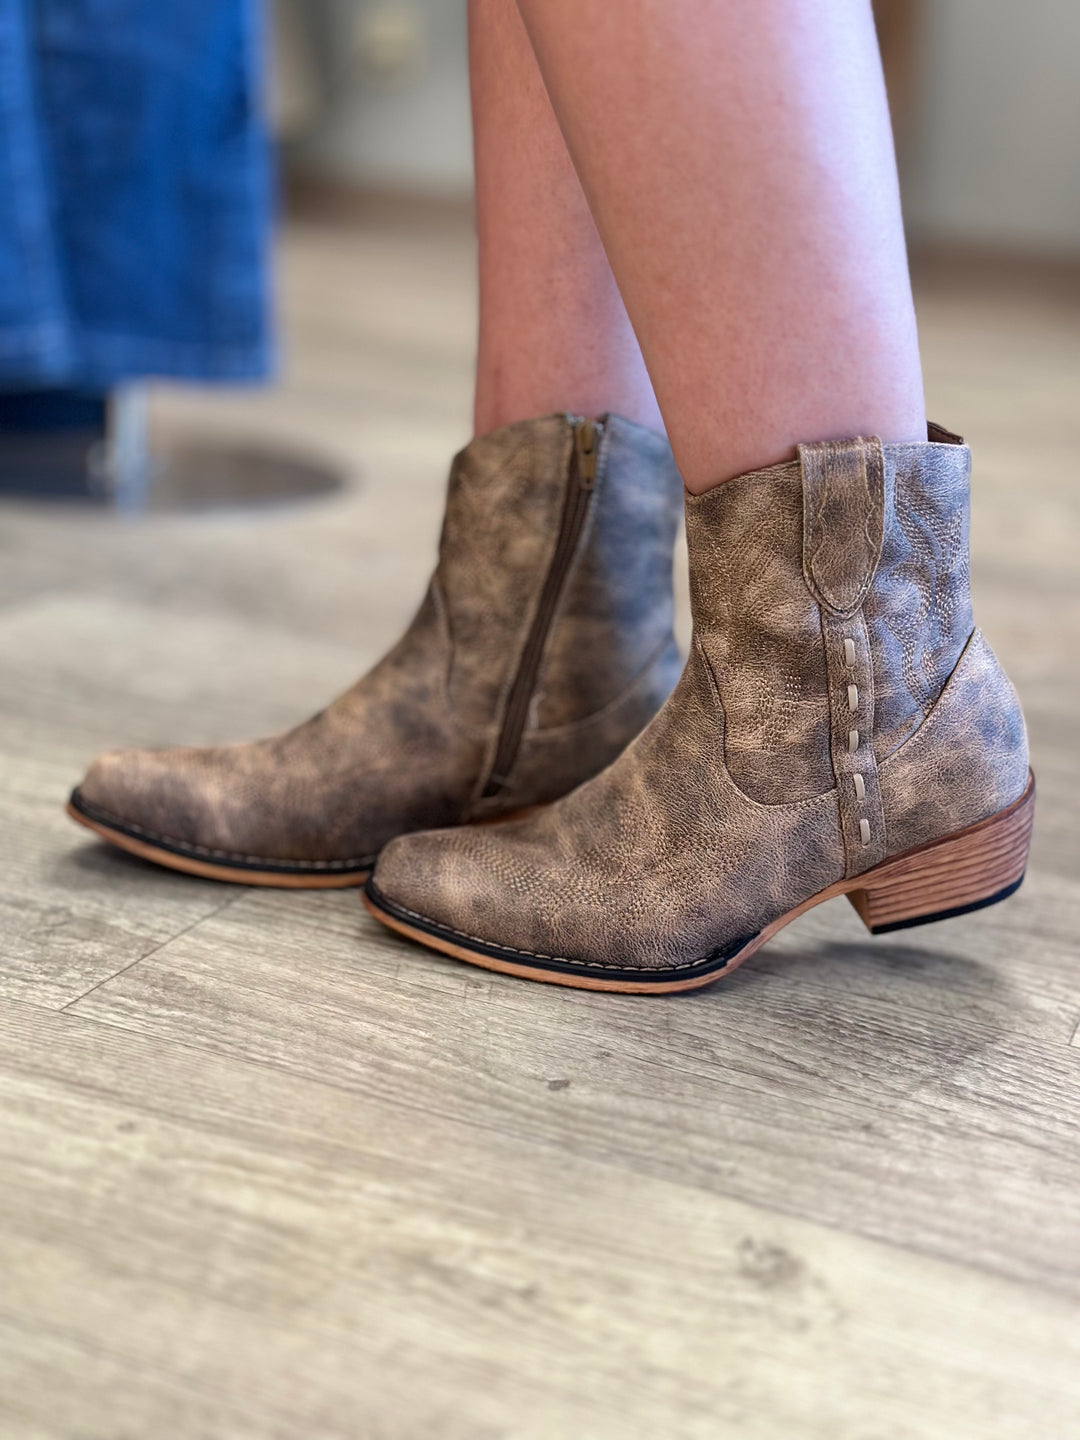 Pierre Dumas Kaylee Western Style Short Boot-Boots-Olem Shoe-Evergreen Boutique, Women’s Fashion Boutique in Santa Claus, Indiana